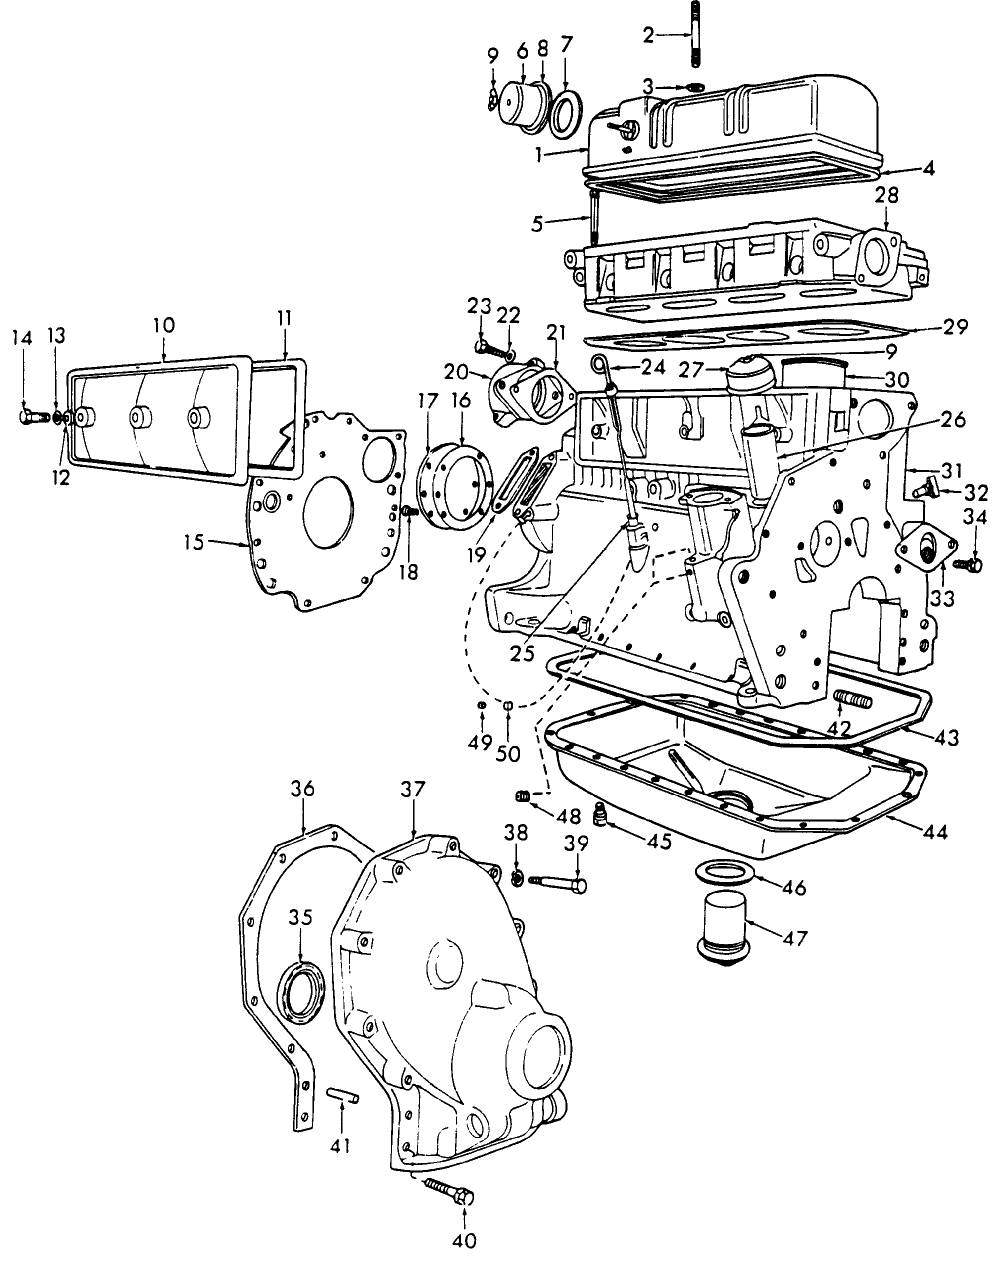 06B01 DIESEL ENGINE ASSEMBLY OUTSIDE, 134" & 172"